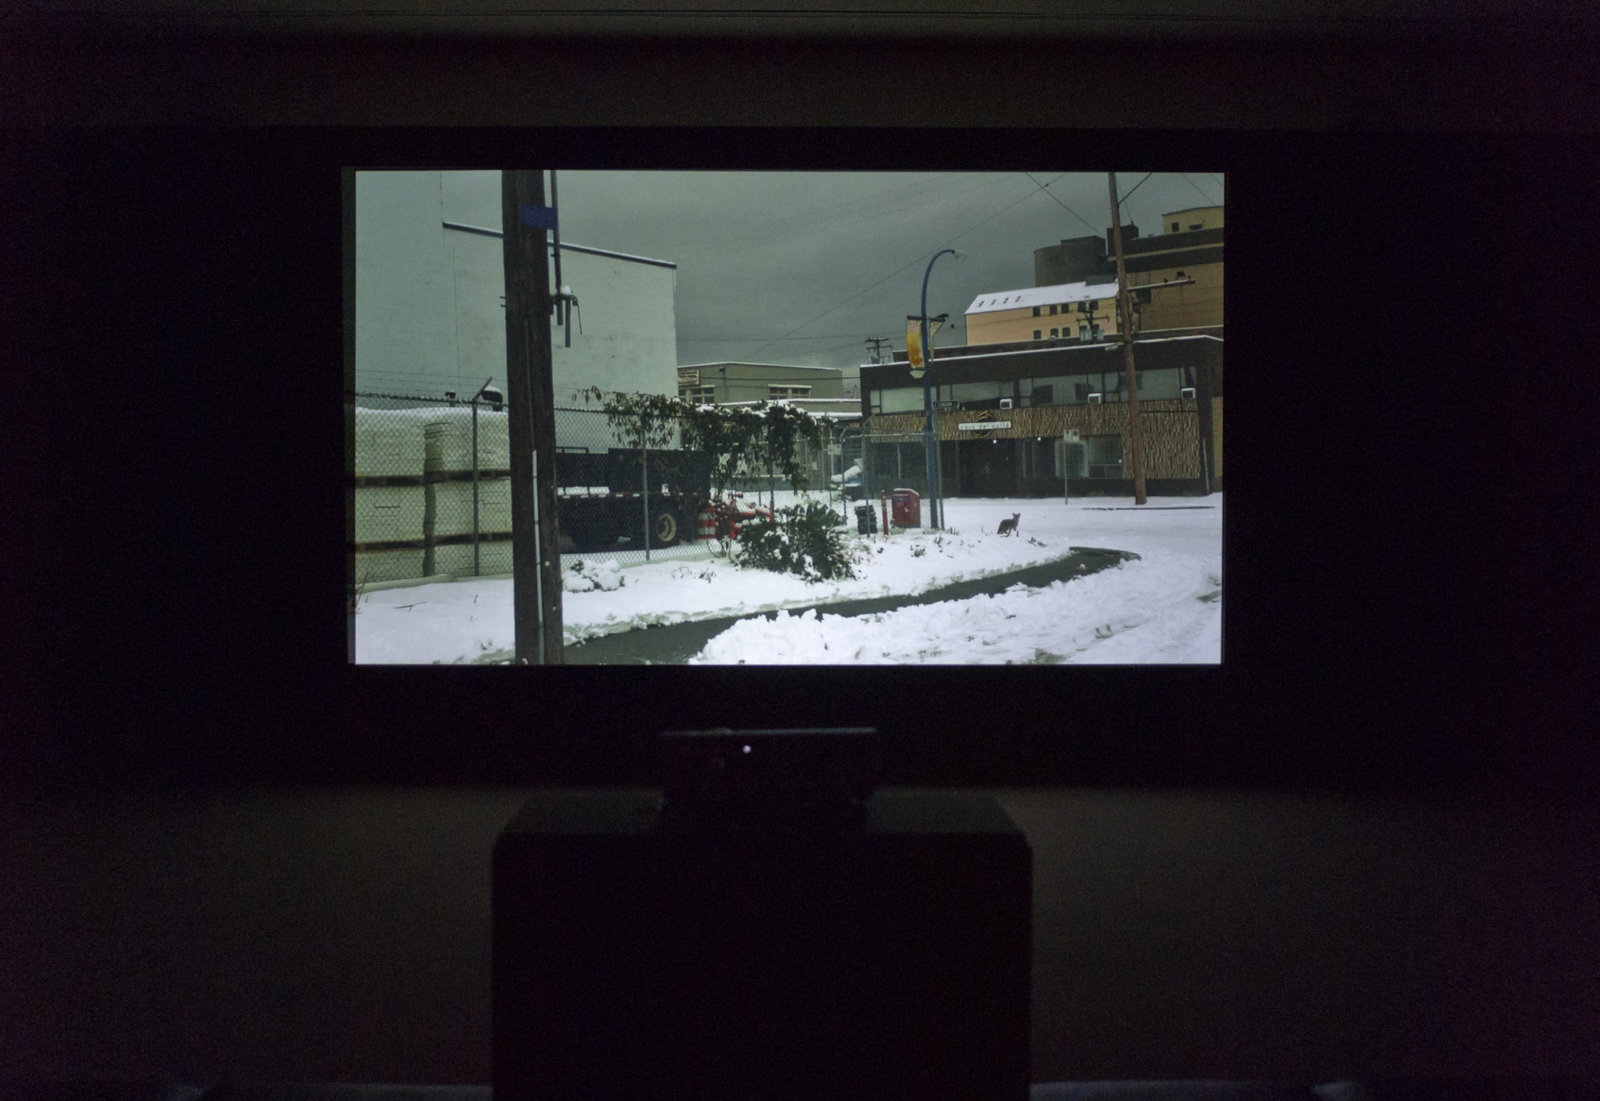 Duane Linklater, Something About Encounter, 2011-2013, HD iphone video with sound, dimensions variable. Installation view, Thunder Bay Art Gallery, Thunder Bay, 2013.